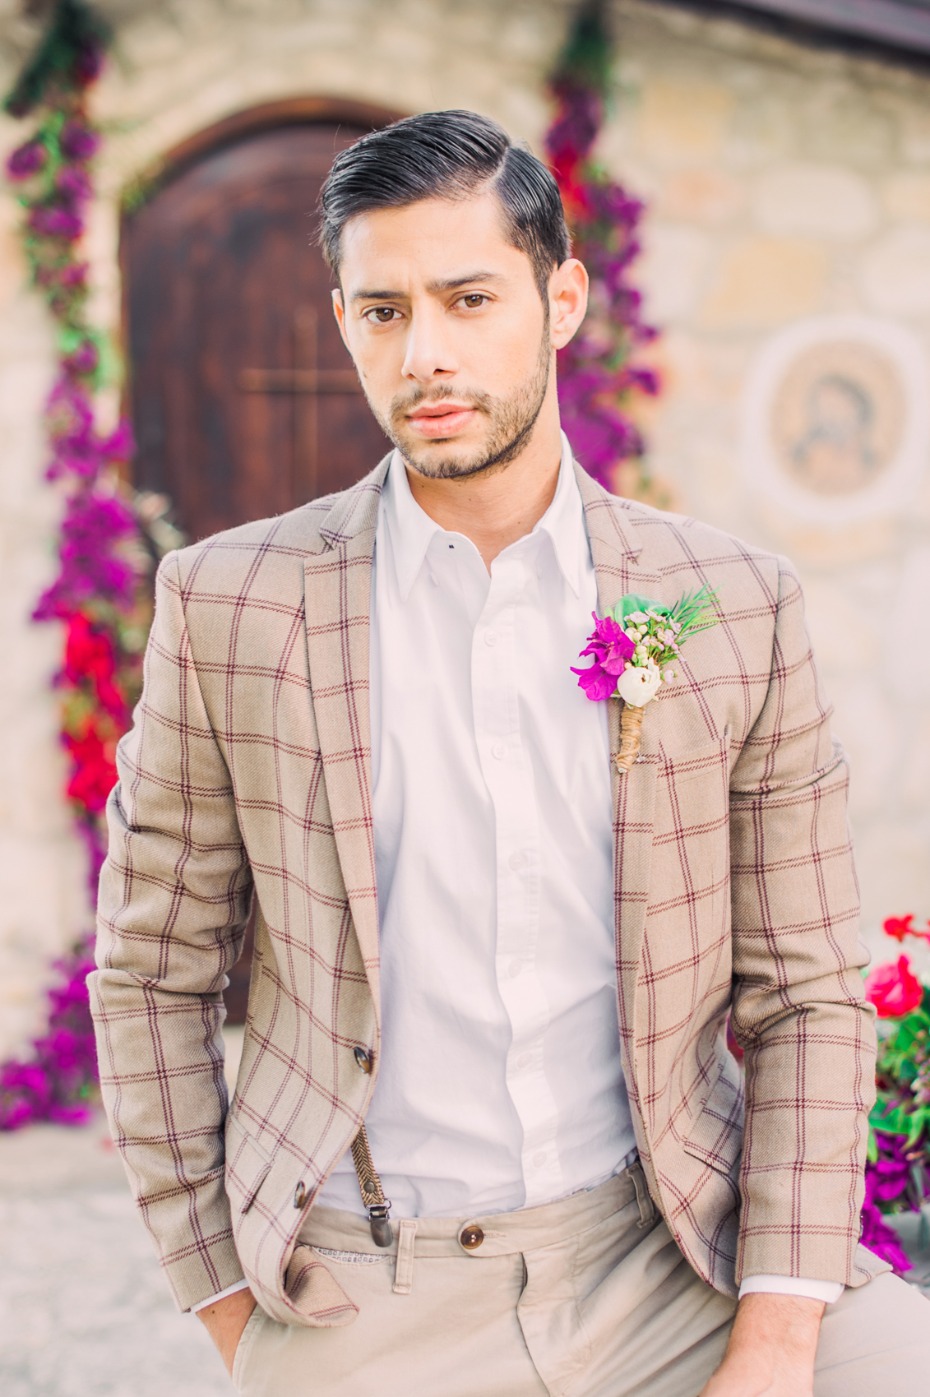 Classic country look for the groom